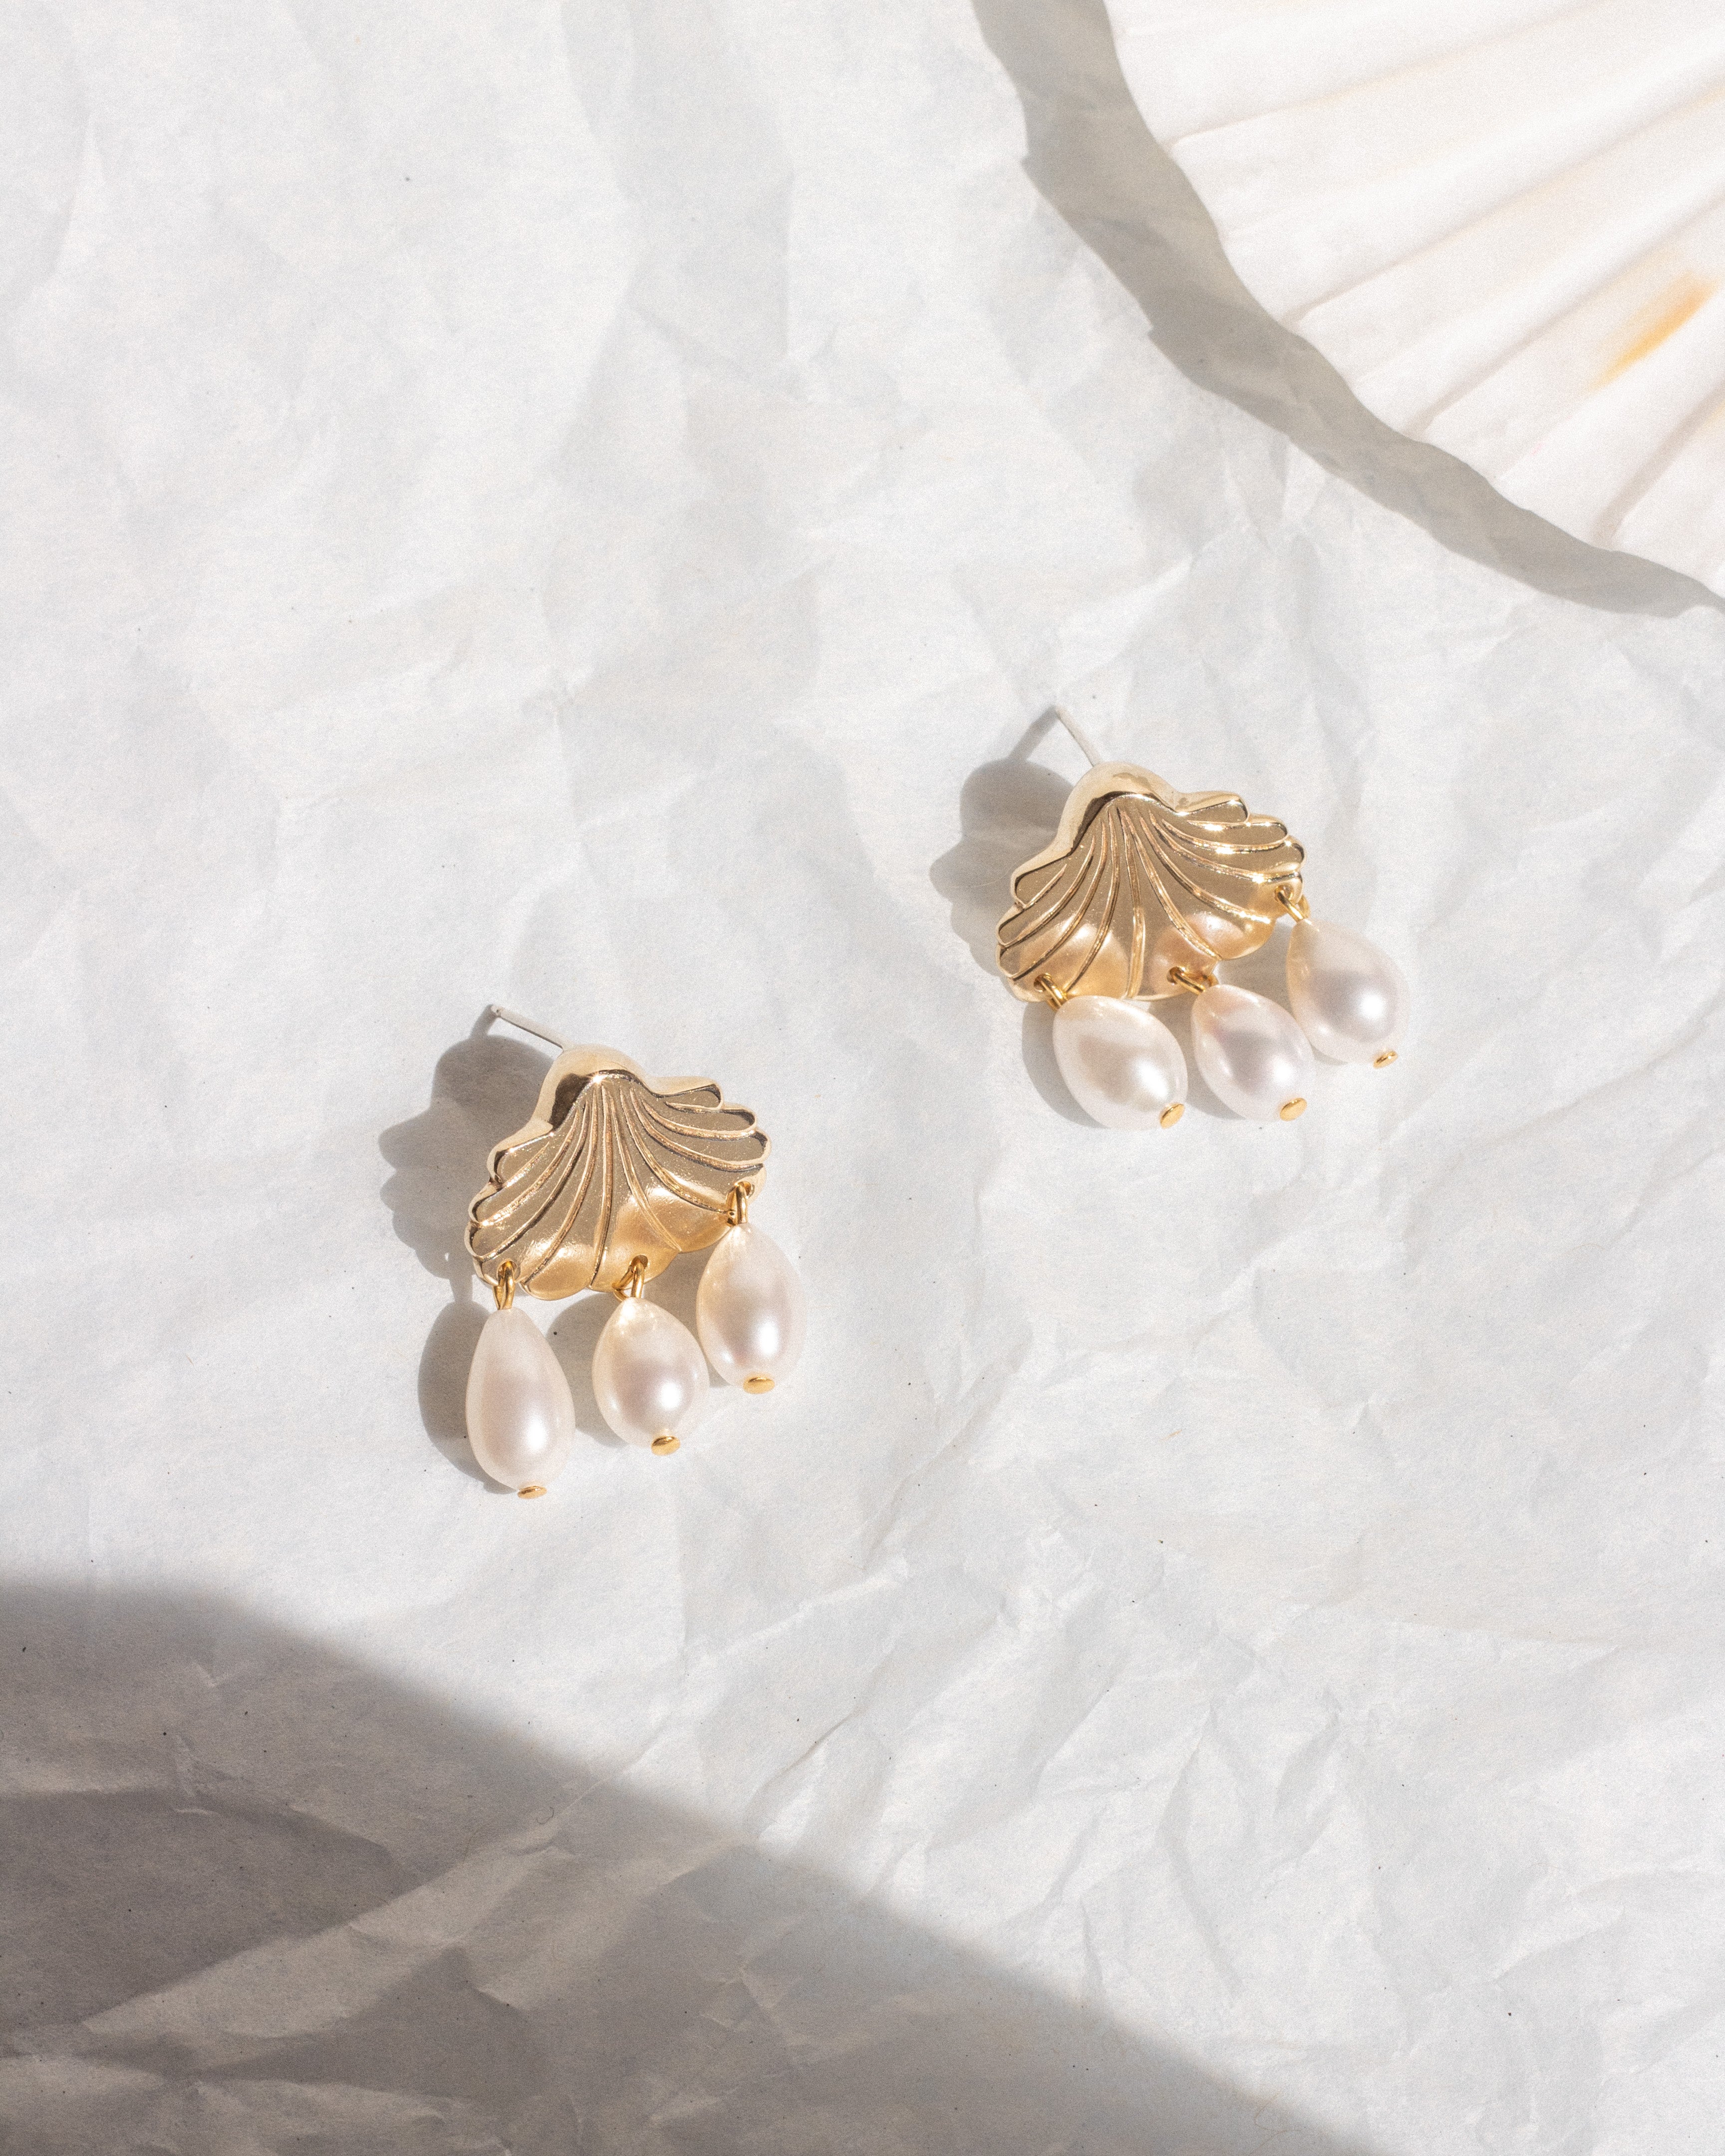 The Grande Coquille Earrings